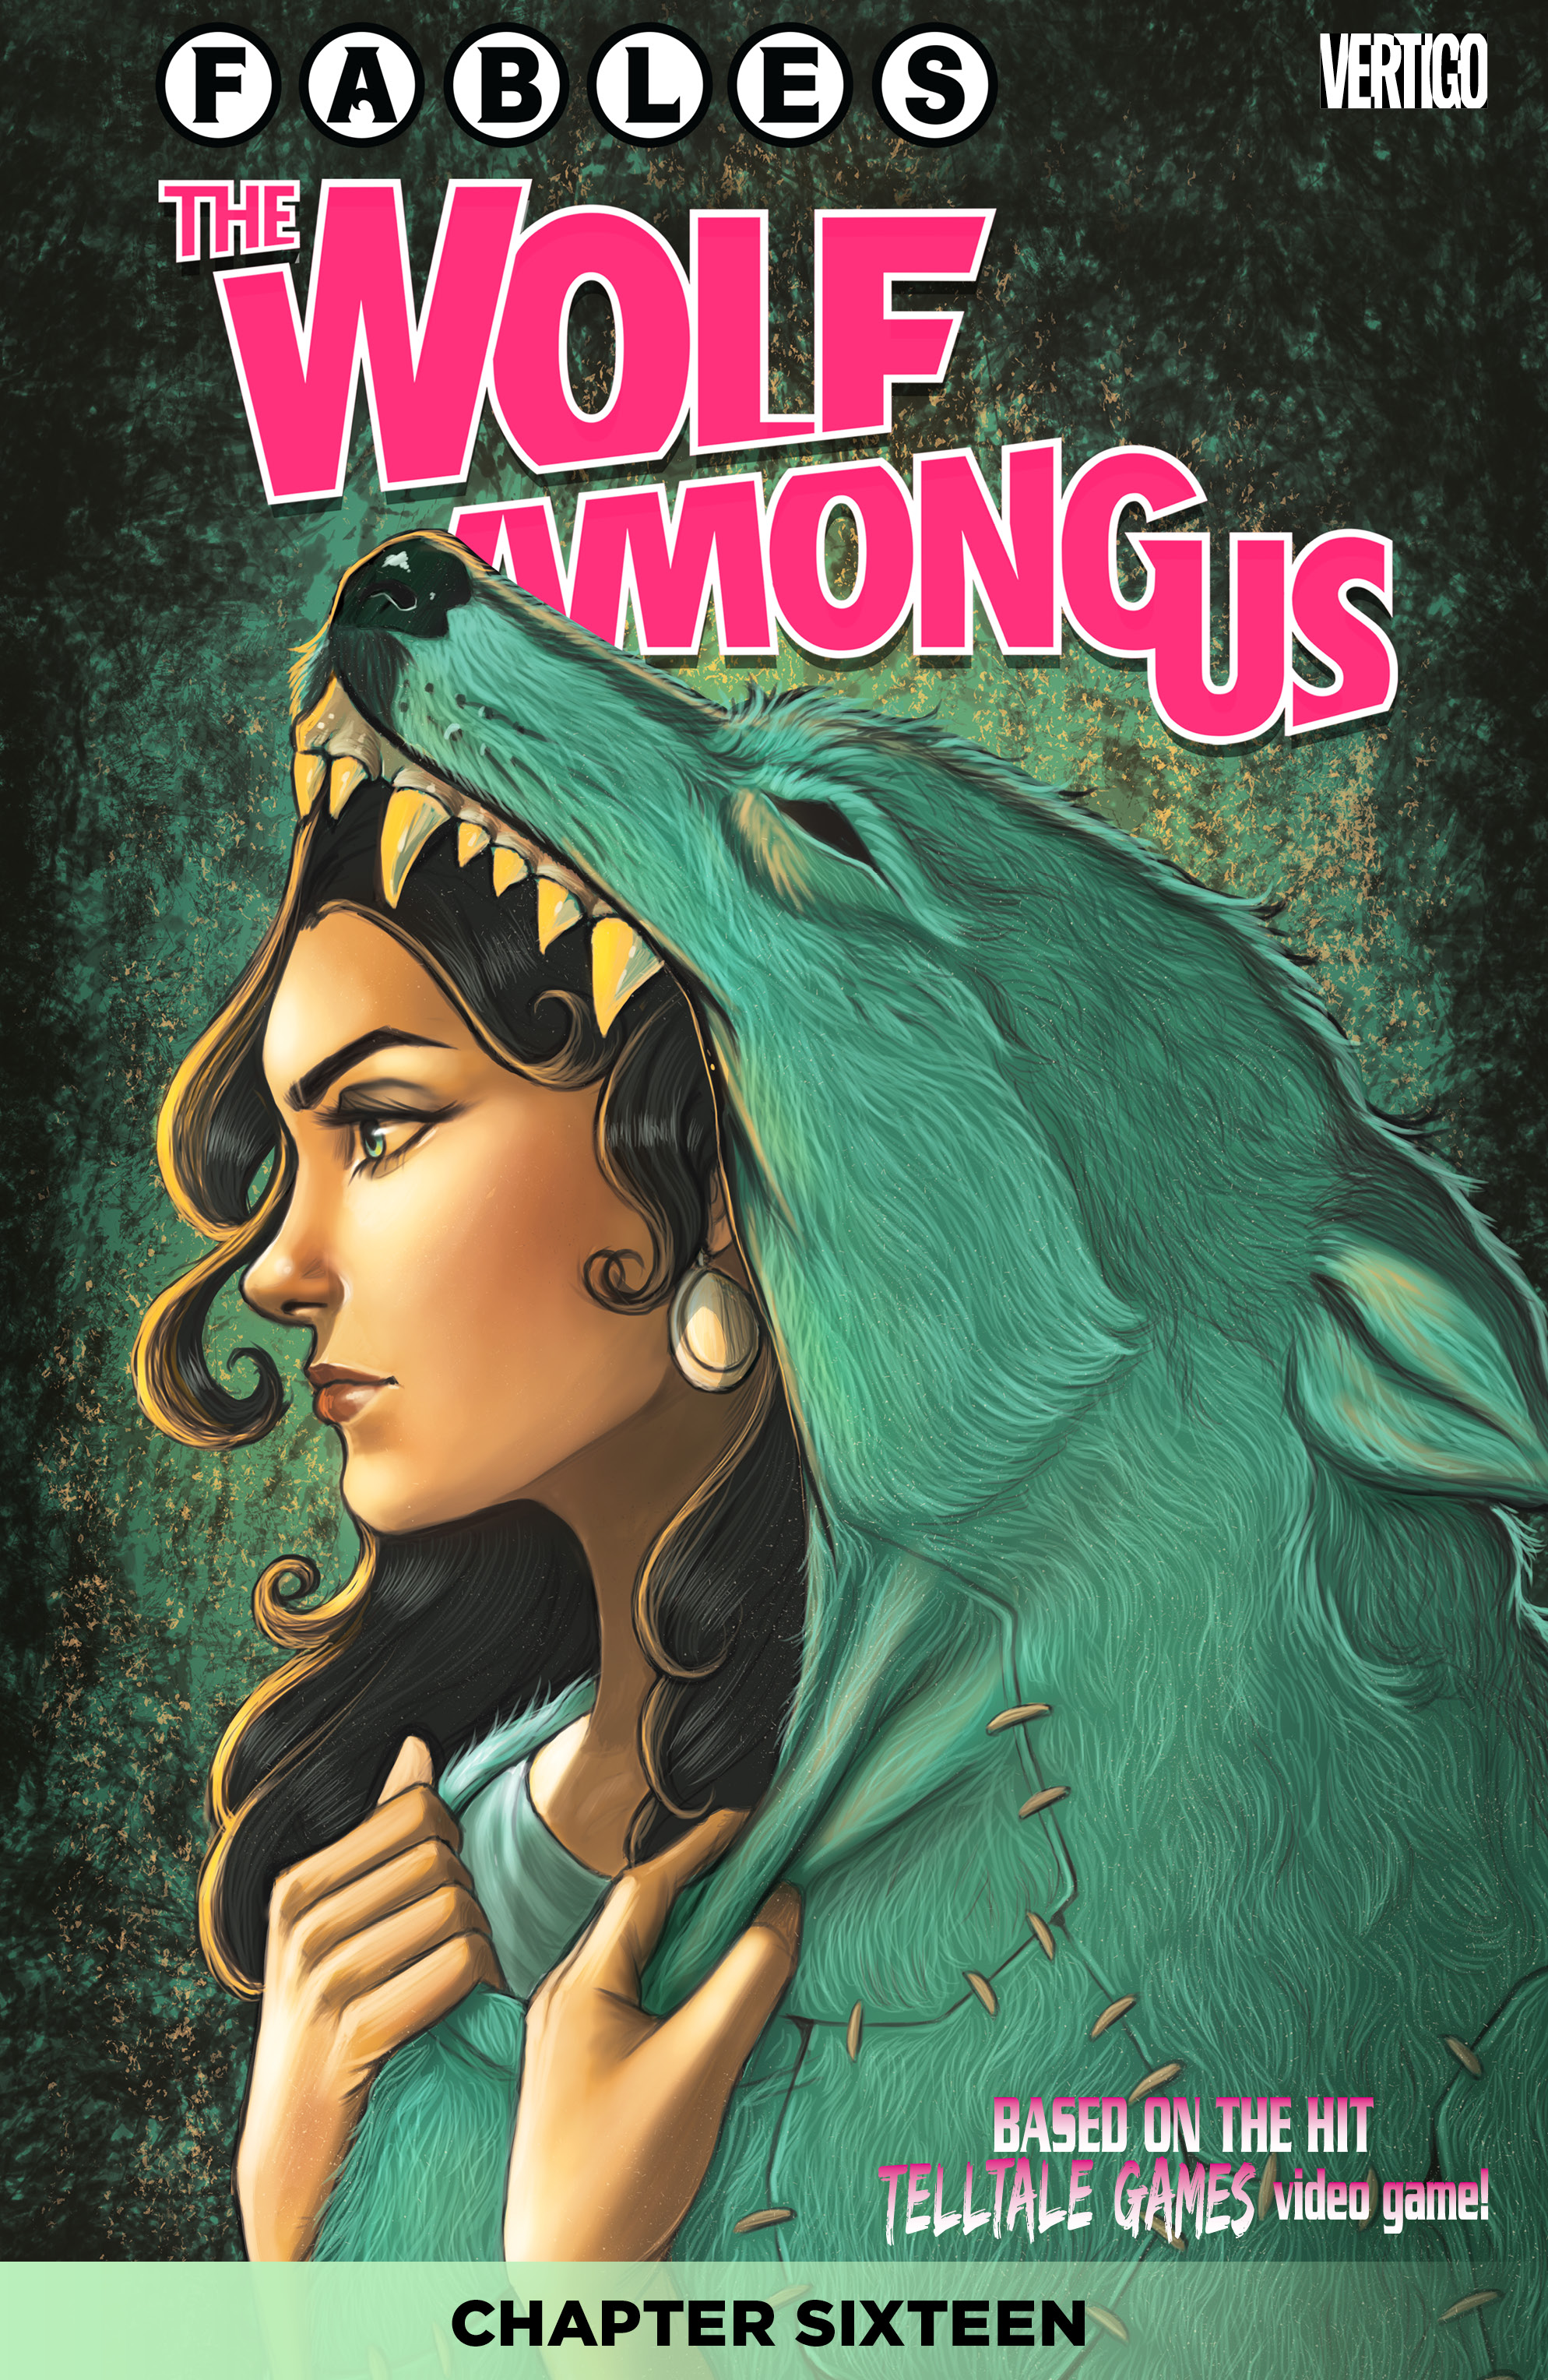 Fables: The Wolf Among Us #16 preview images